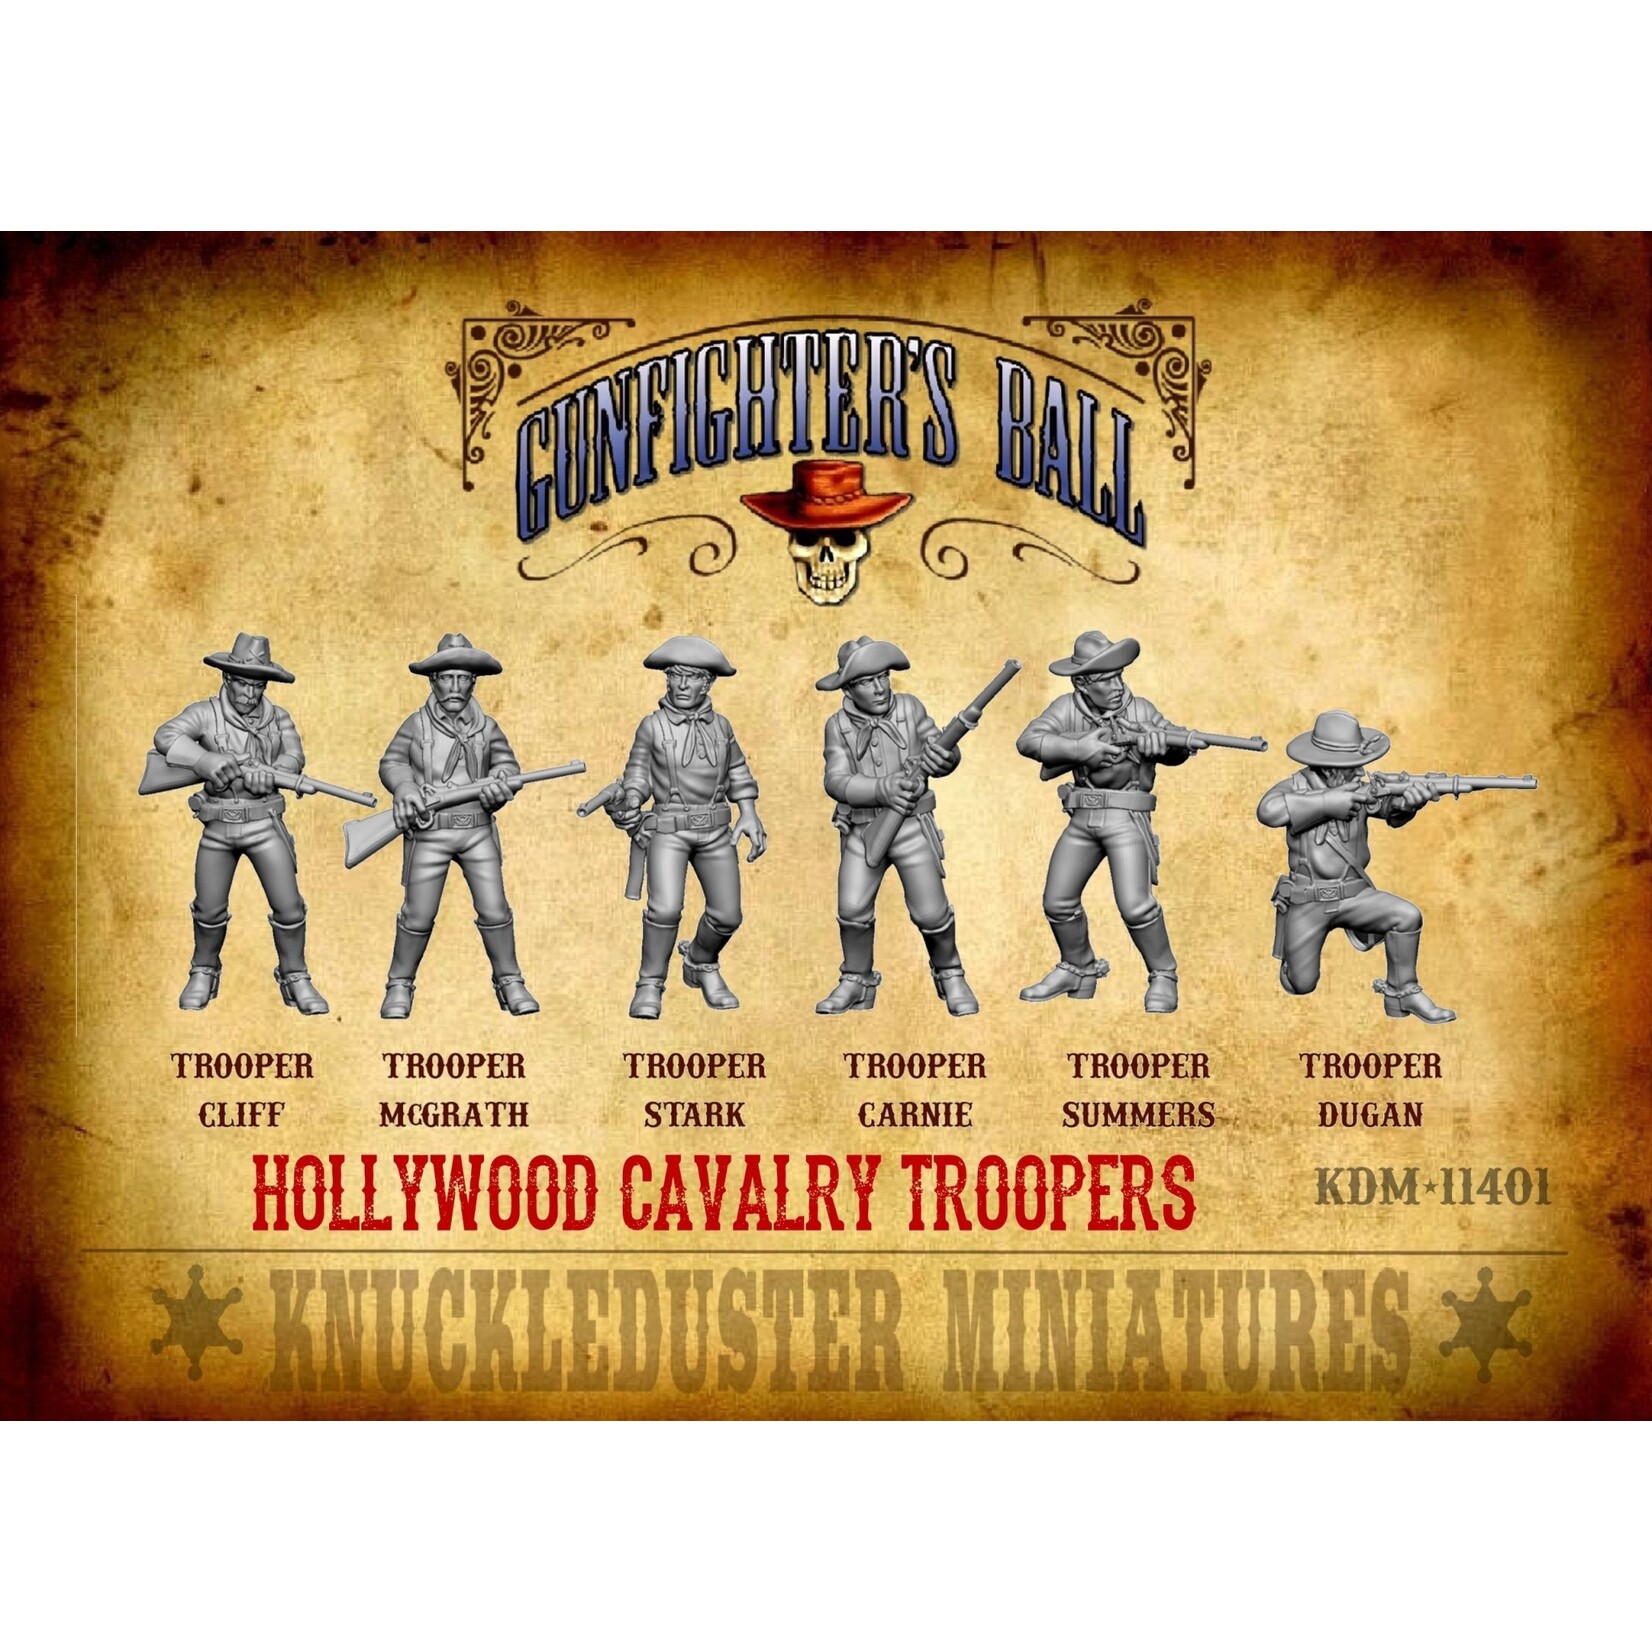 Knuckleduster Miniatures Hollywood Cavalry Troopers Faction